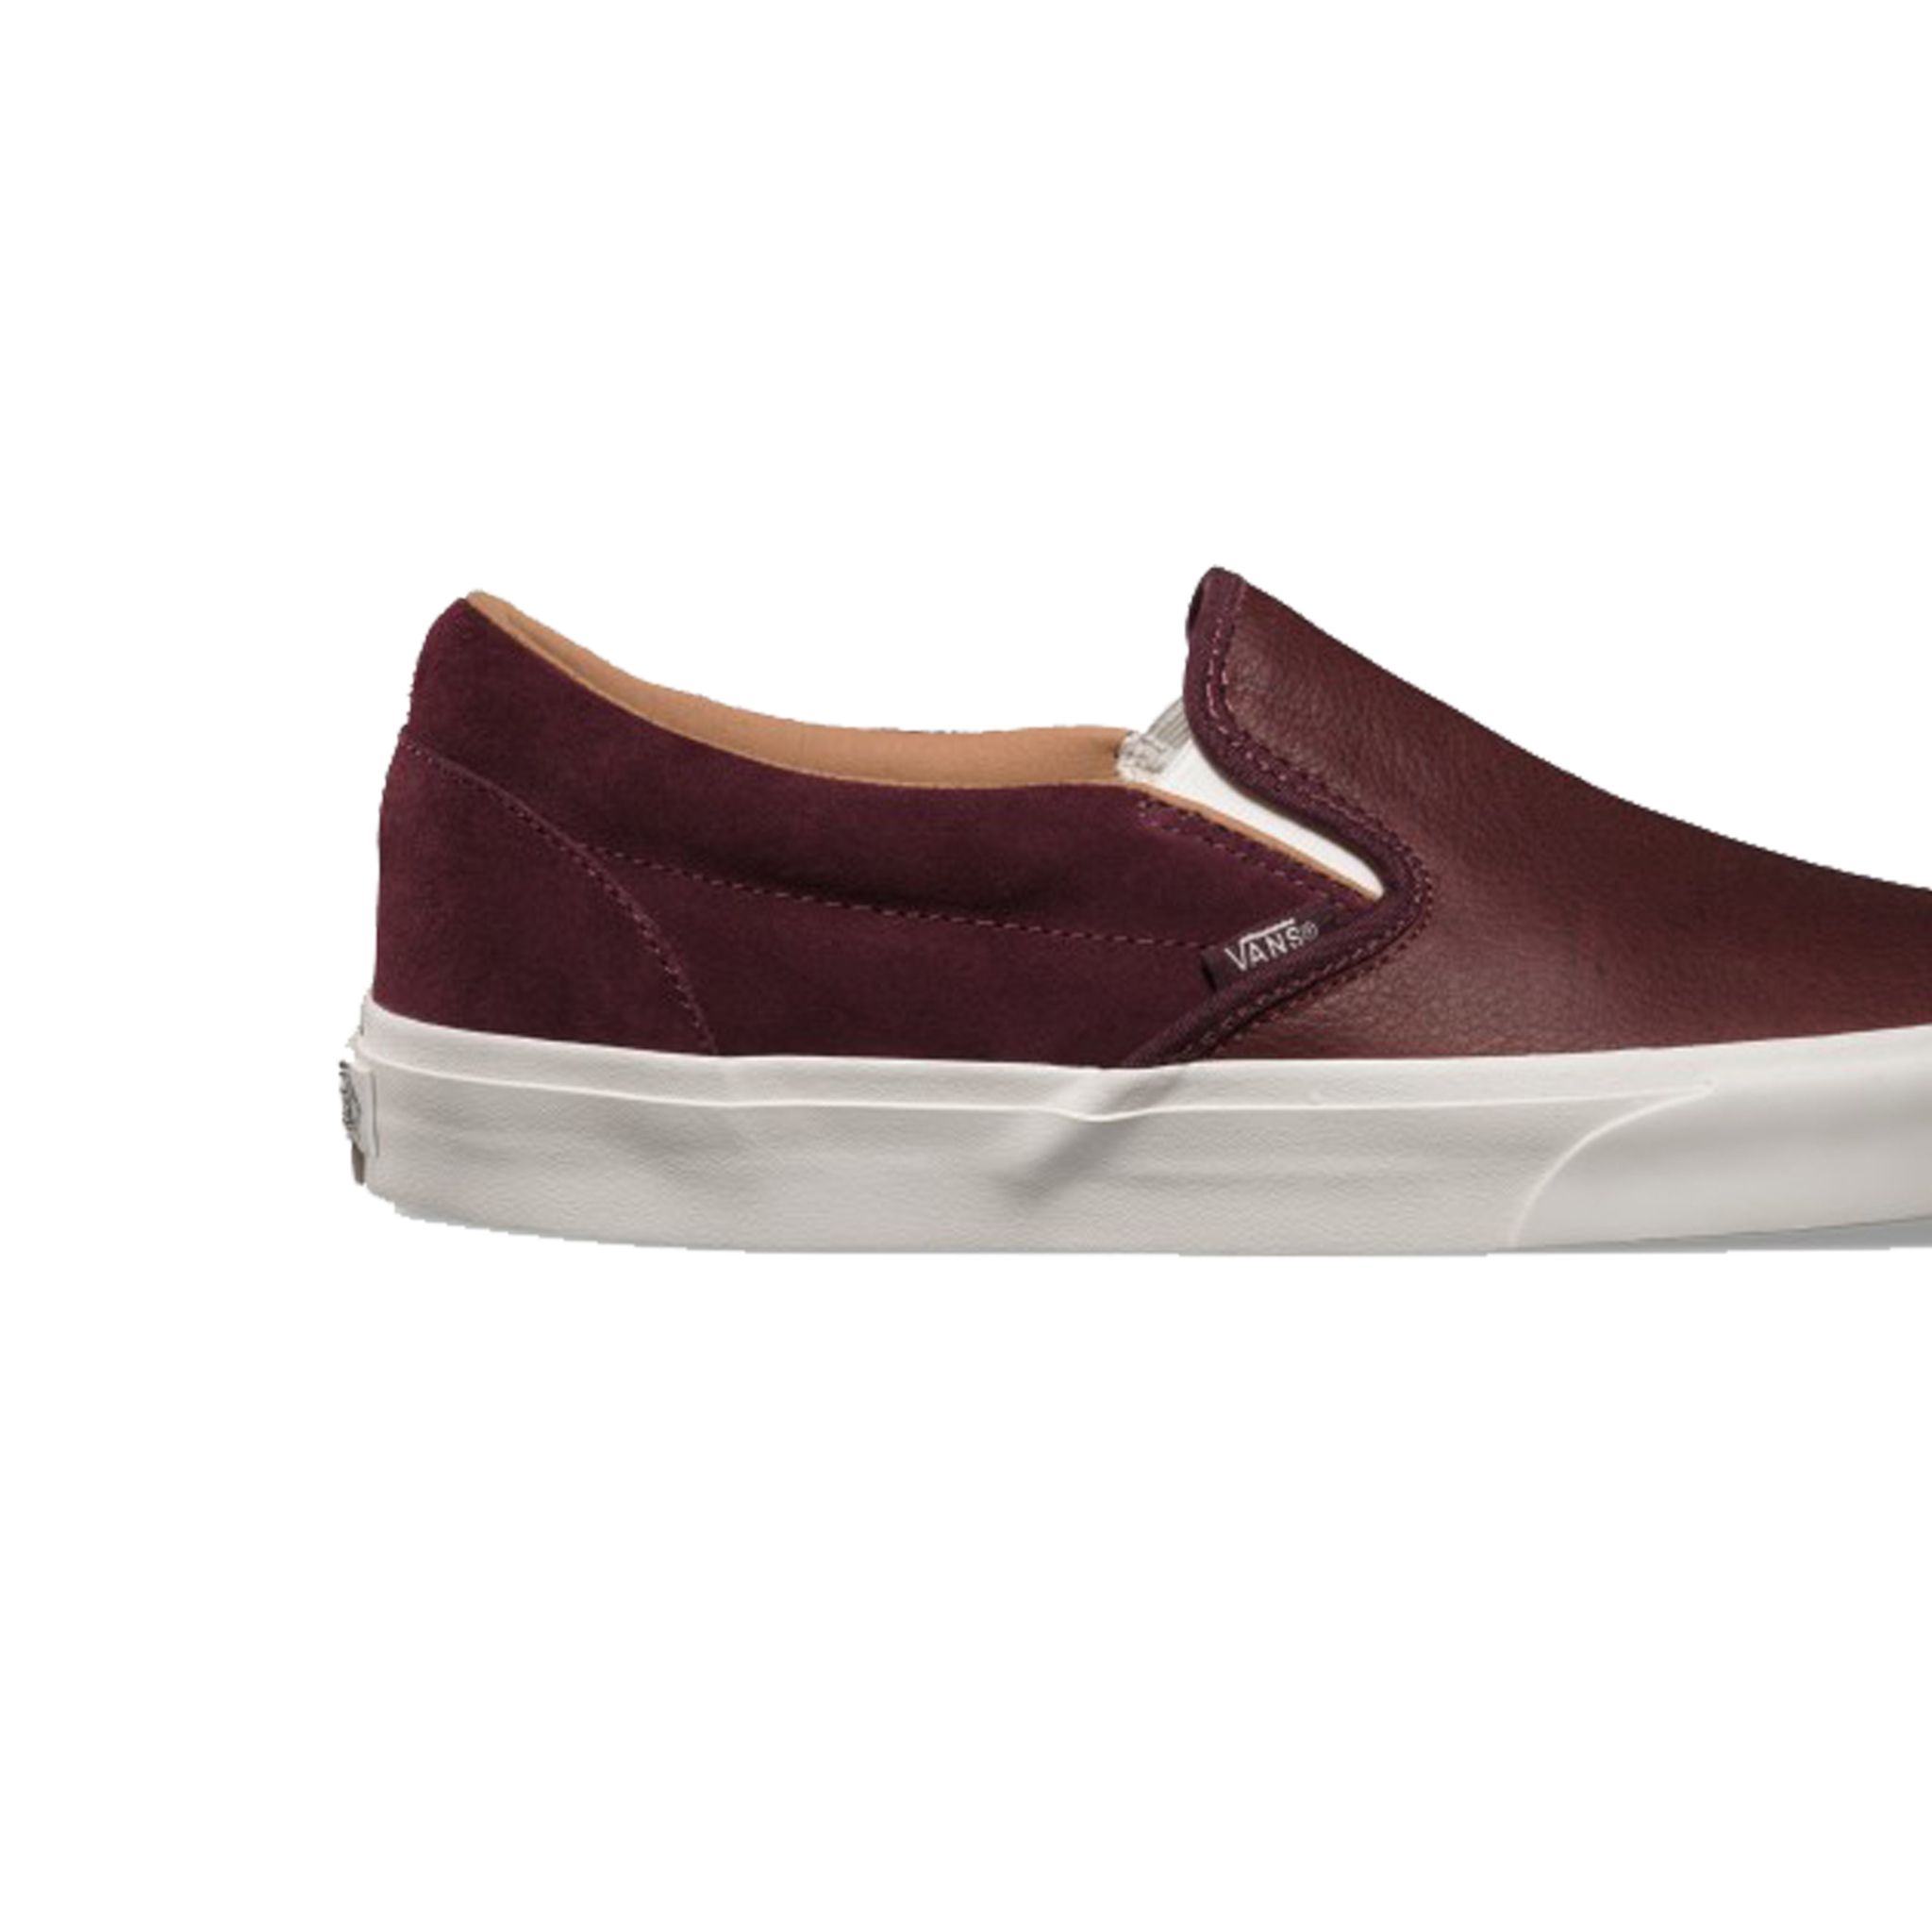 coolest slip on sneakers